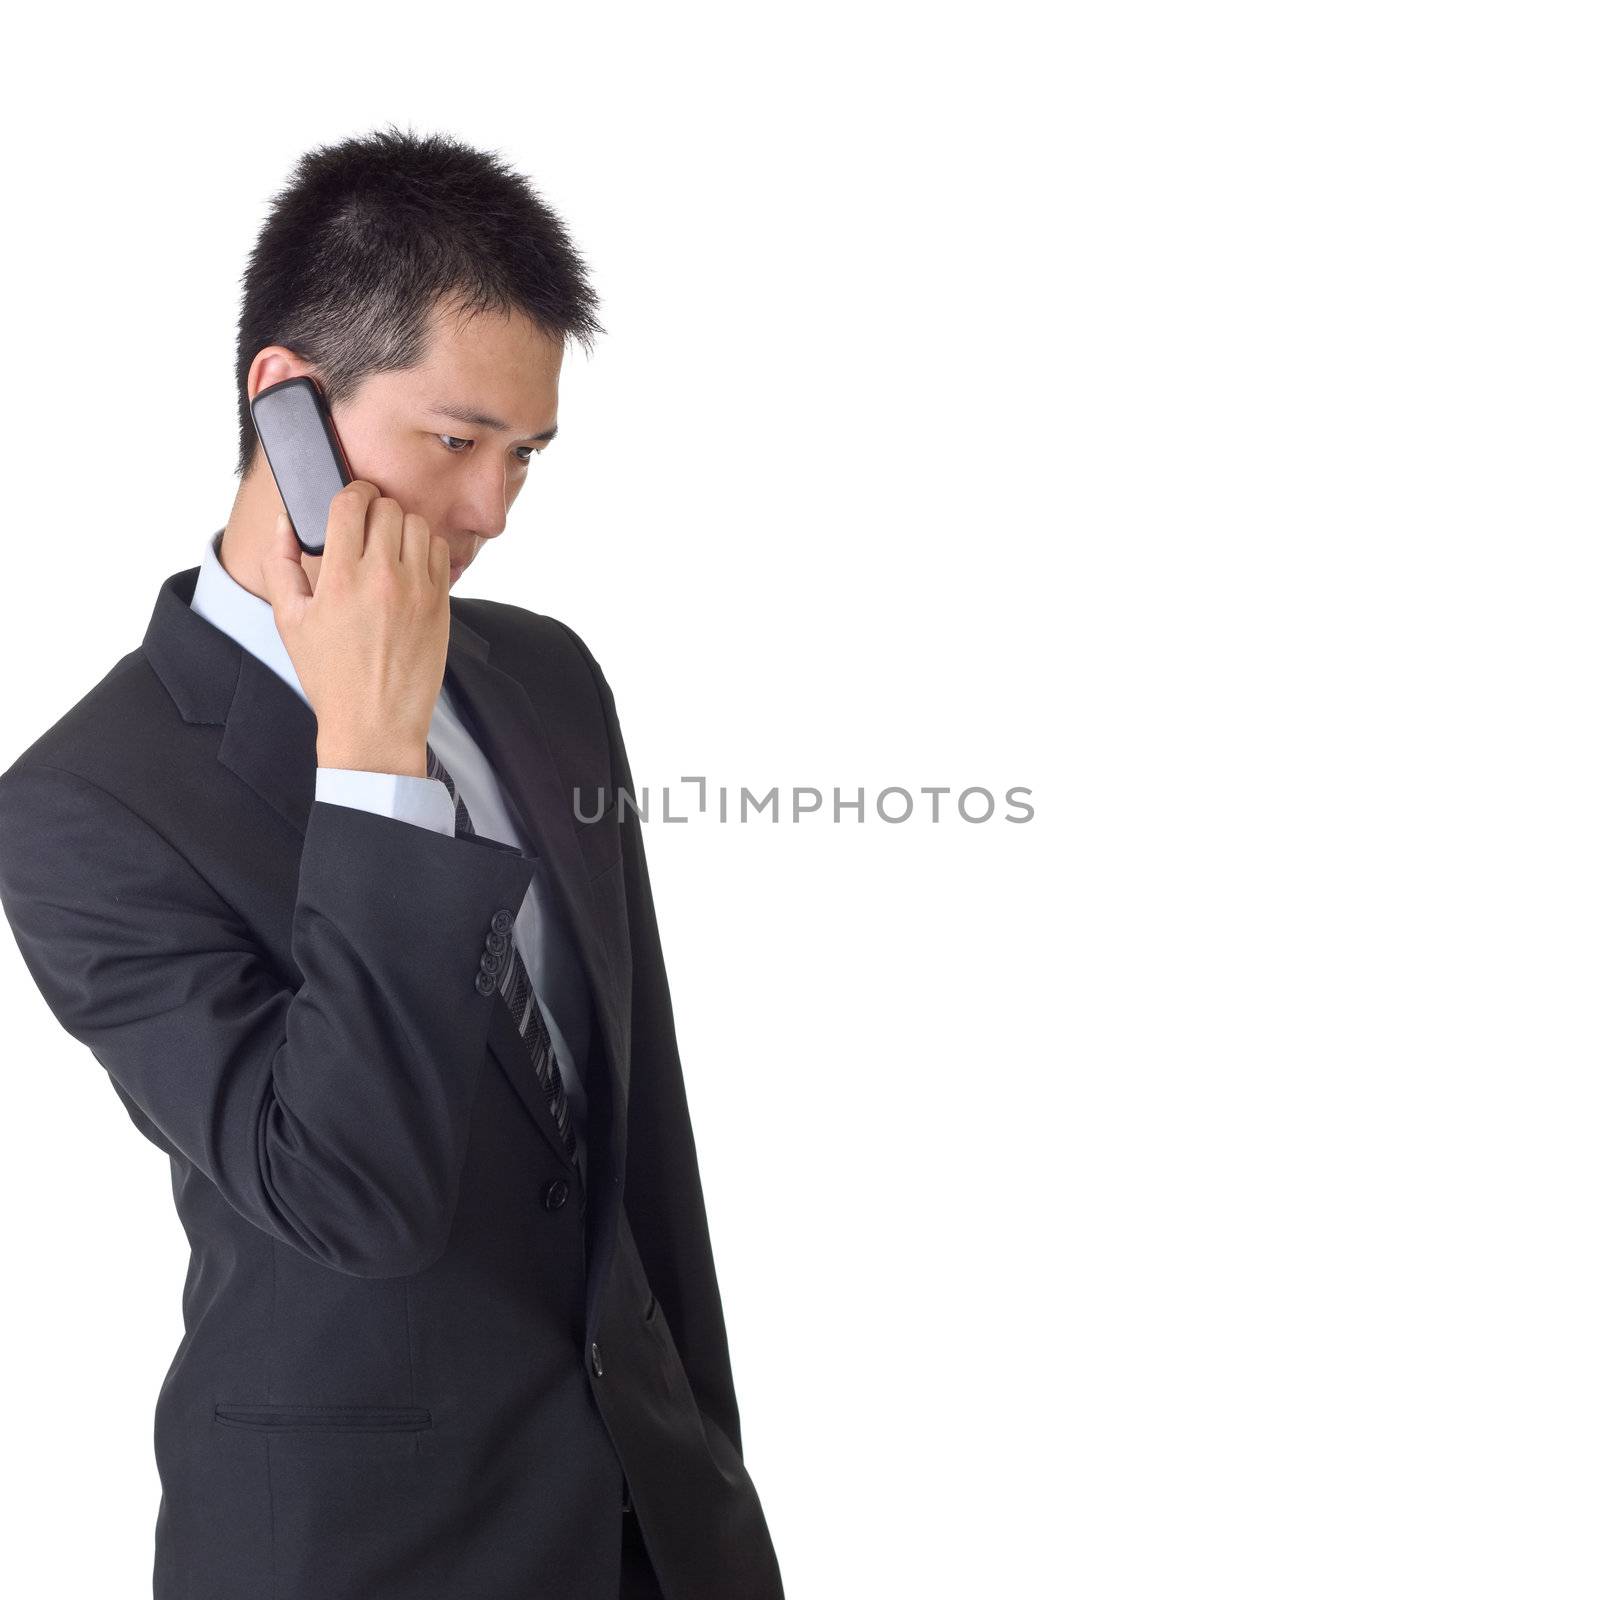 Business man on phone, closeup portrait with copyspace on white.